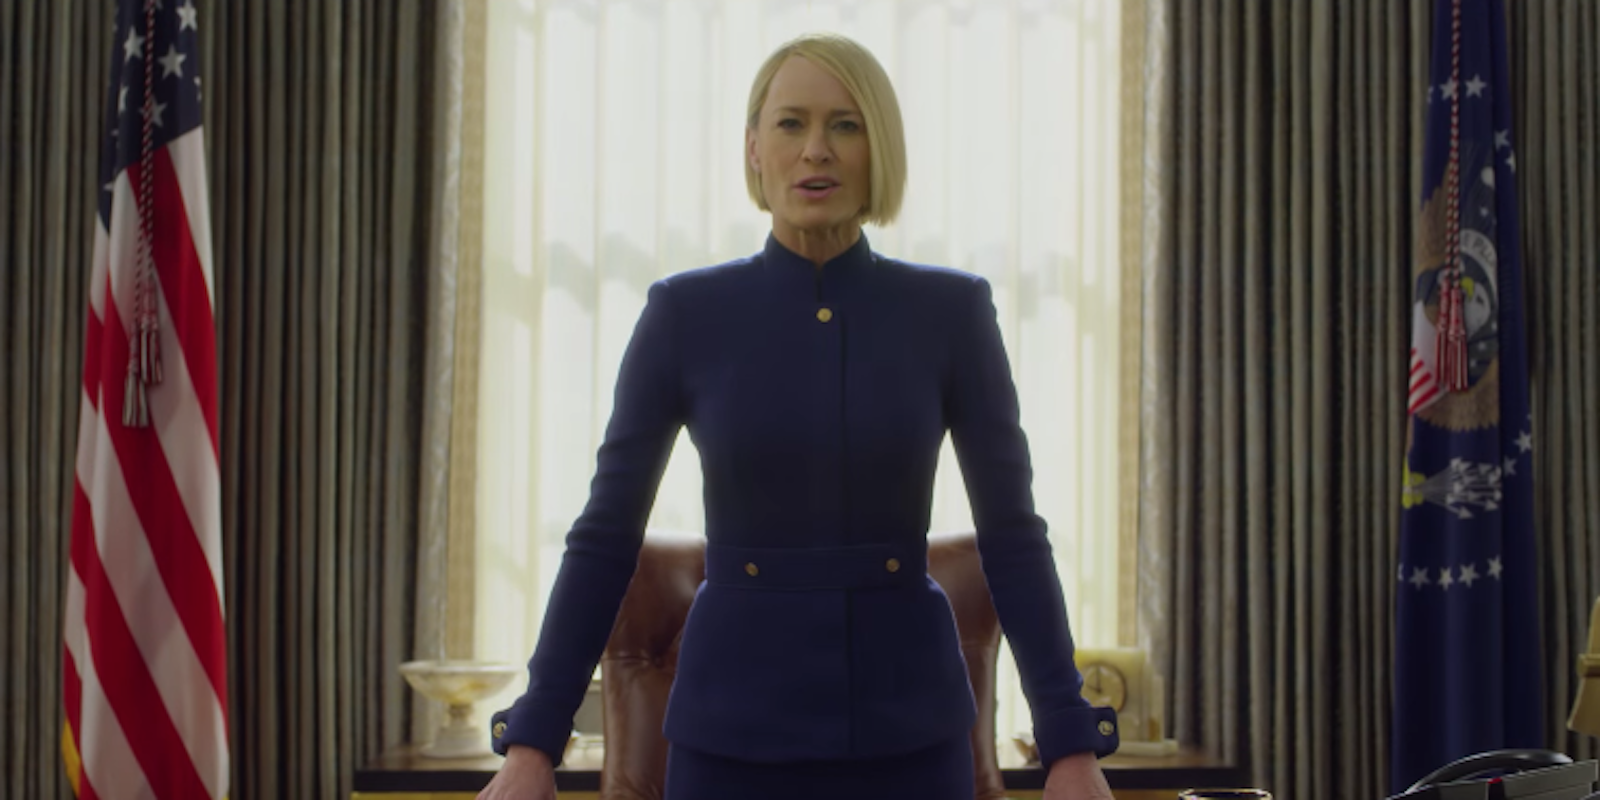 Netflix Releases Kevin Spacey-Free Trailer for 'House of Cards' - Robin Wright stands with her hands on her desk in House of Cards trailer